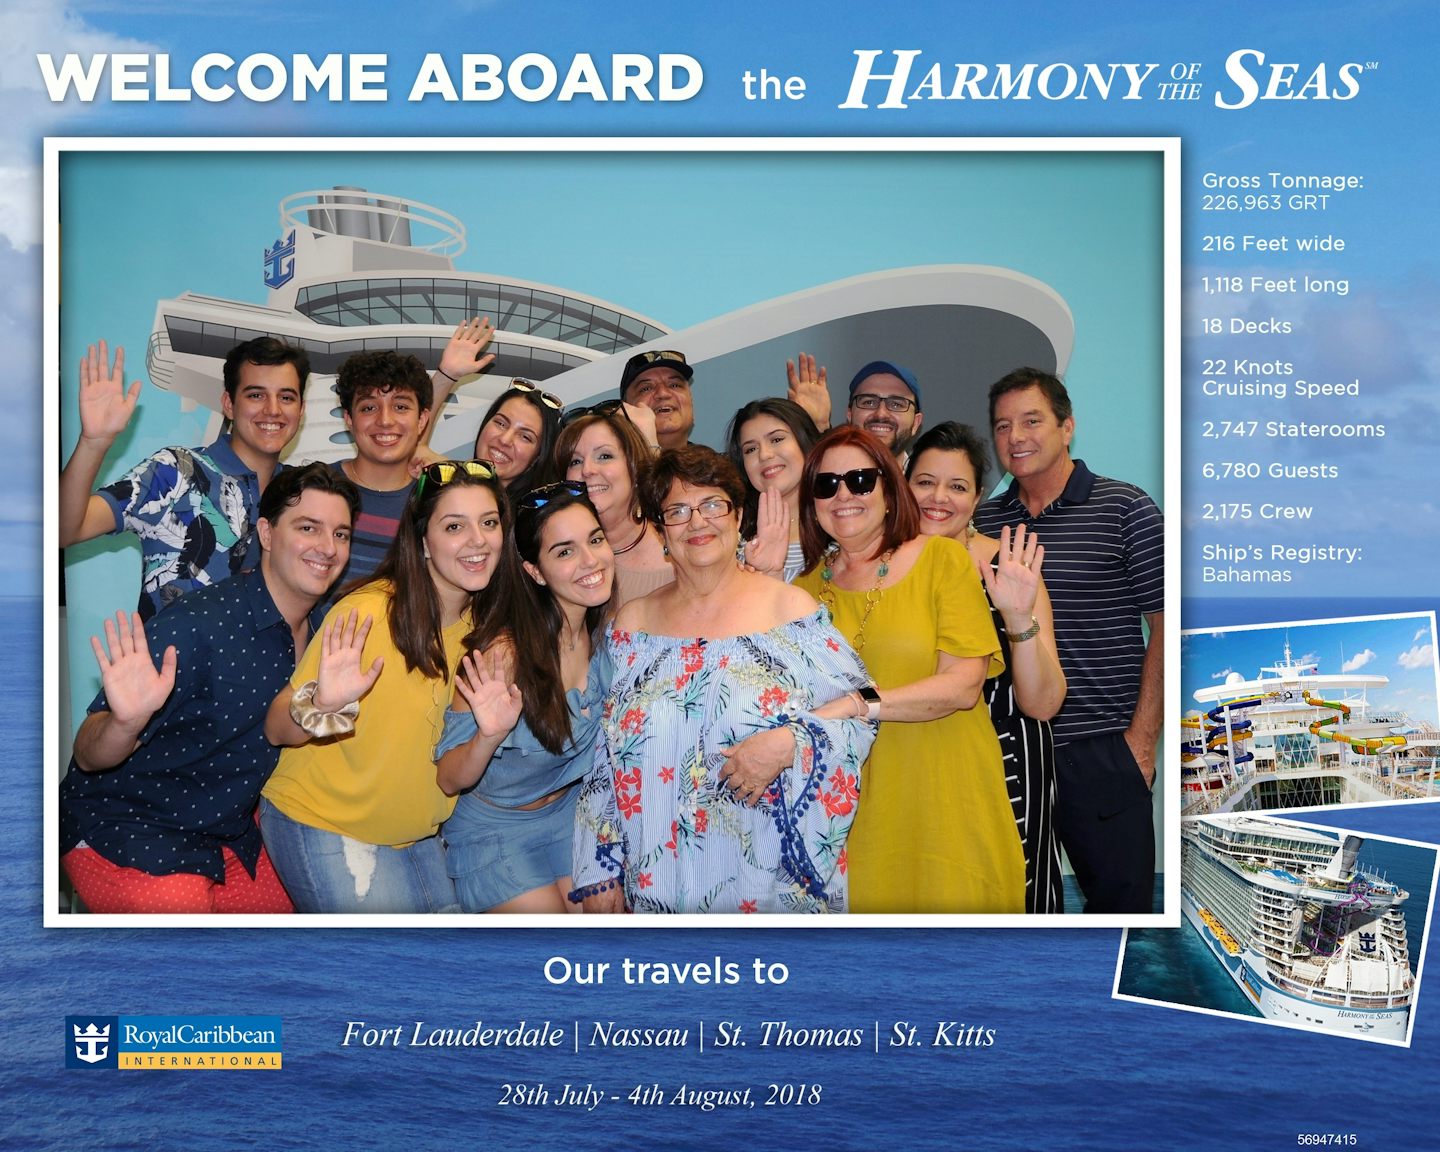 The MENACHE and WICHTERICH FAMILY ABOUT TO BOARD THE HARMONY OF THE SEAS CR